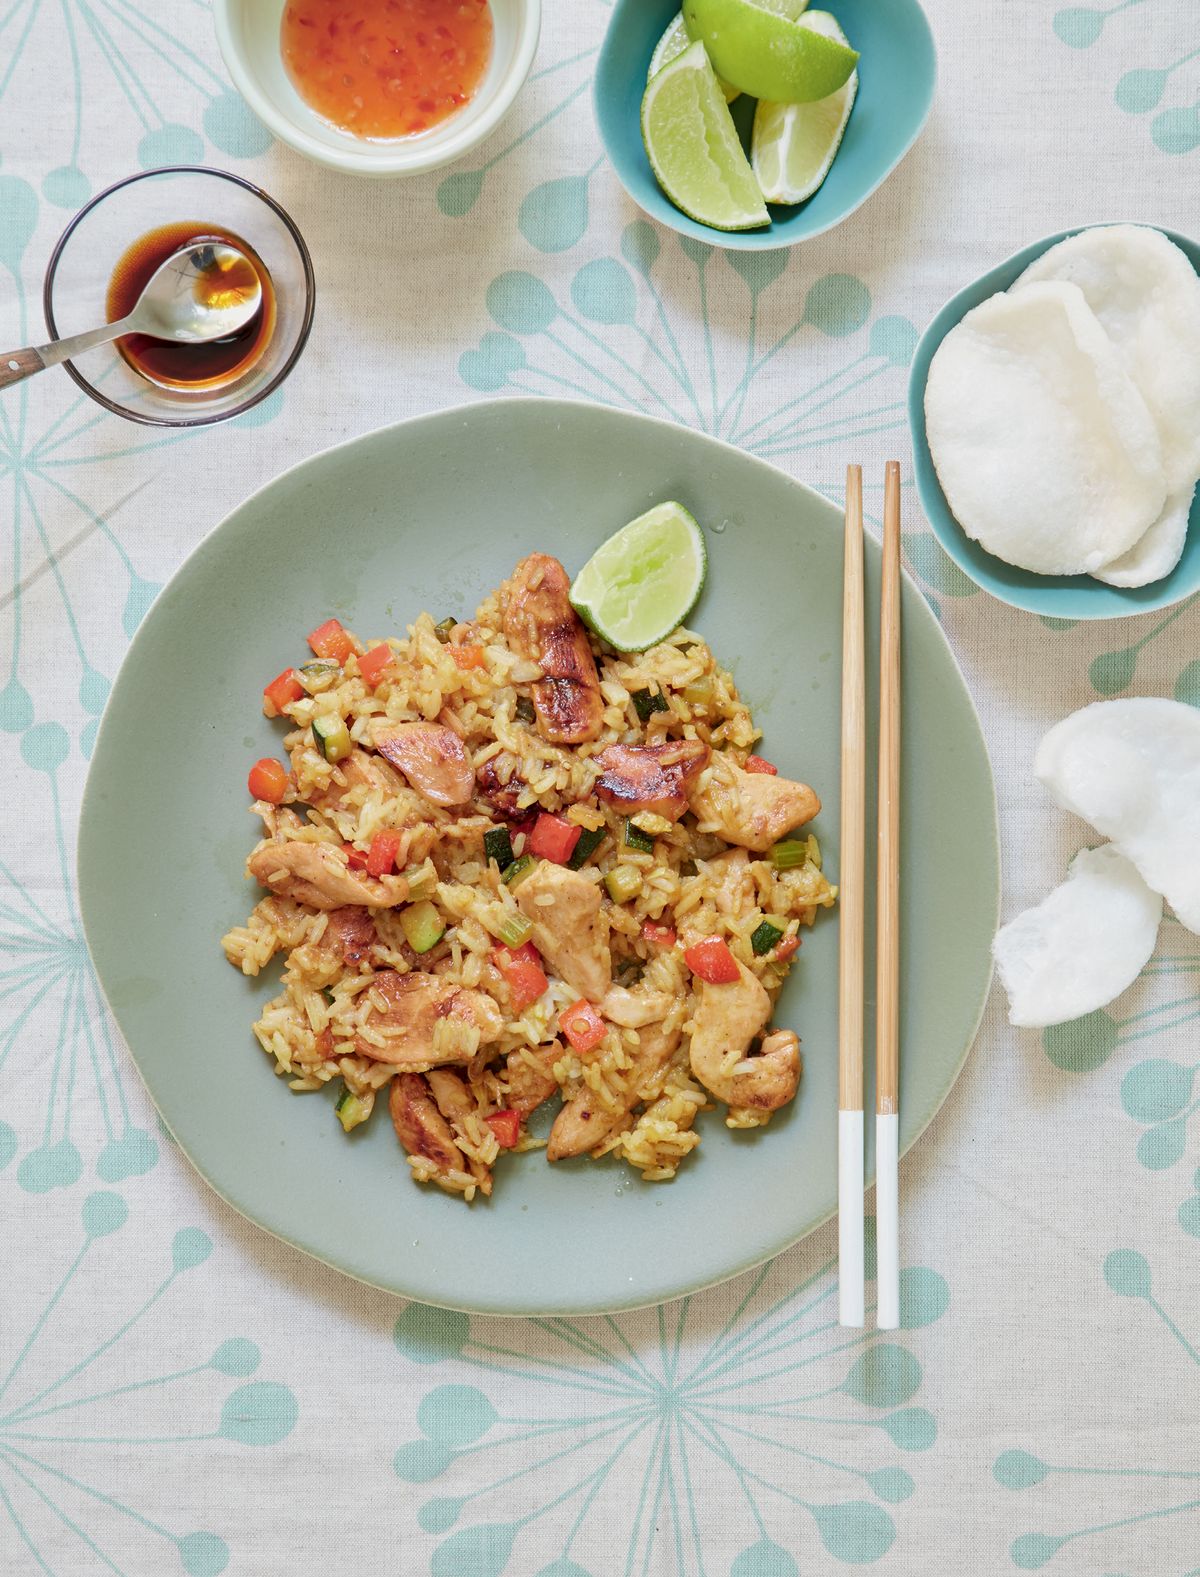 Mary Berry’s Panang Chicken and Rice Stir-fry